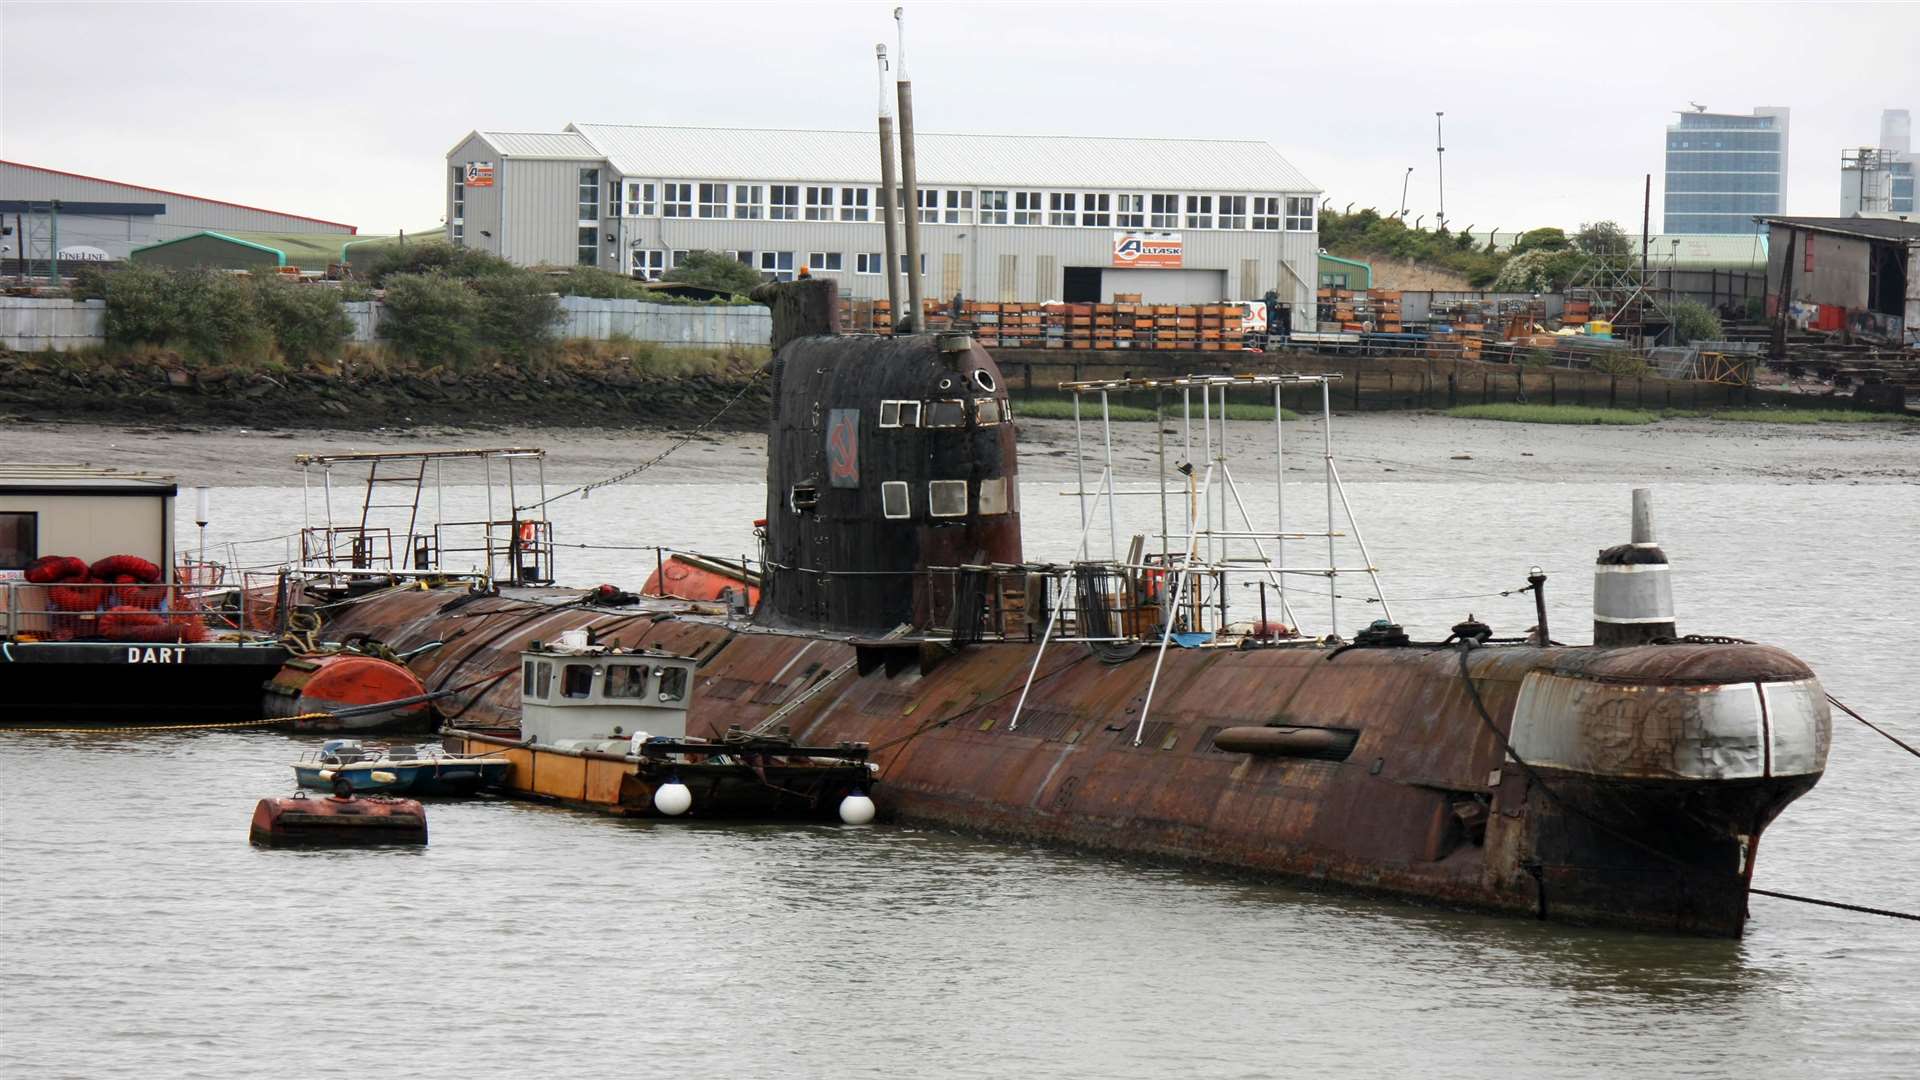 The submarine moored in the River Medway has been used as a movie location.